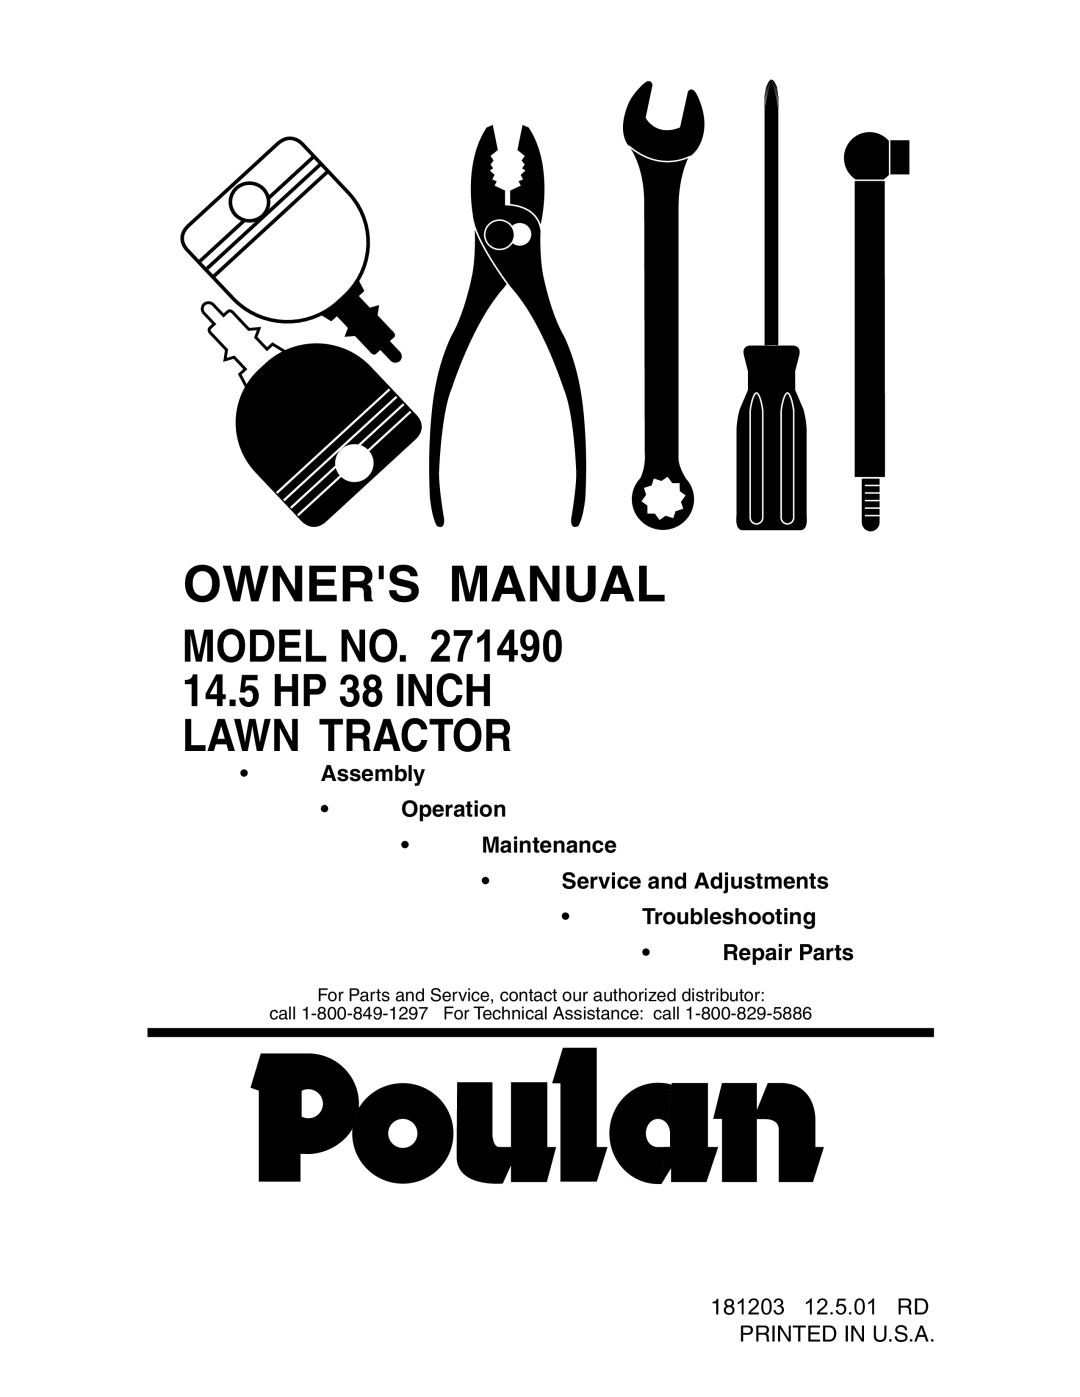 Poulan 271490 manual Model No, 14.5HP 38 INCH LAWN TRACTOR 